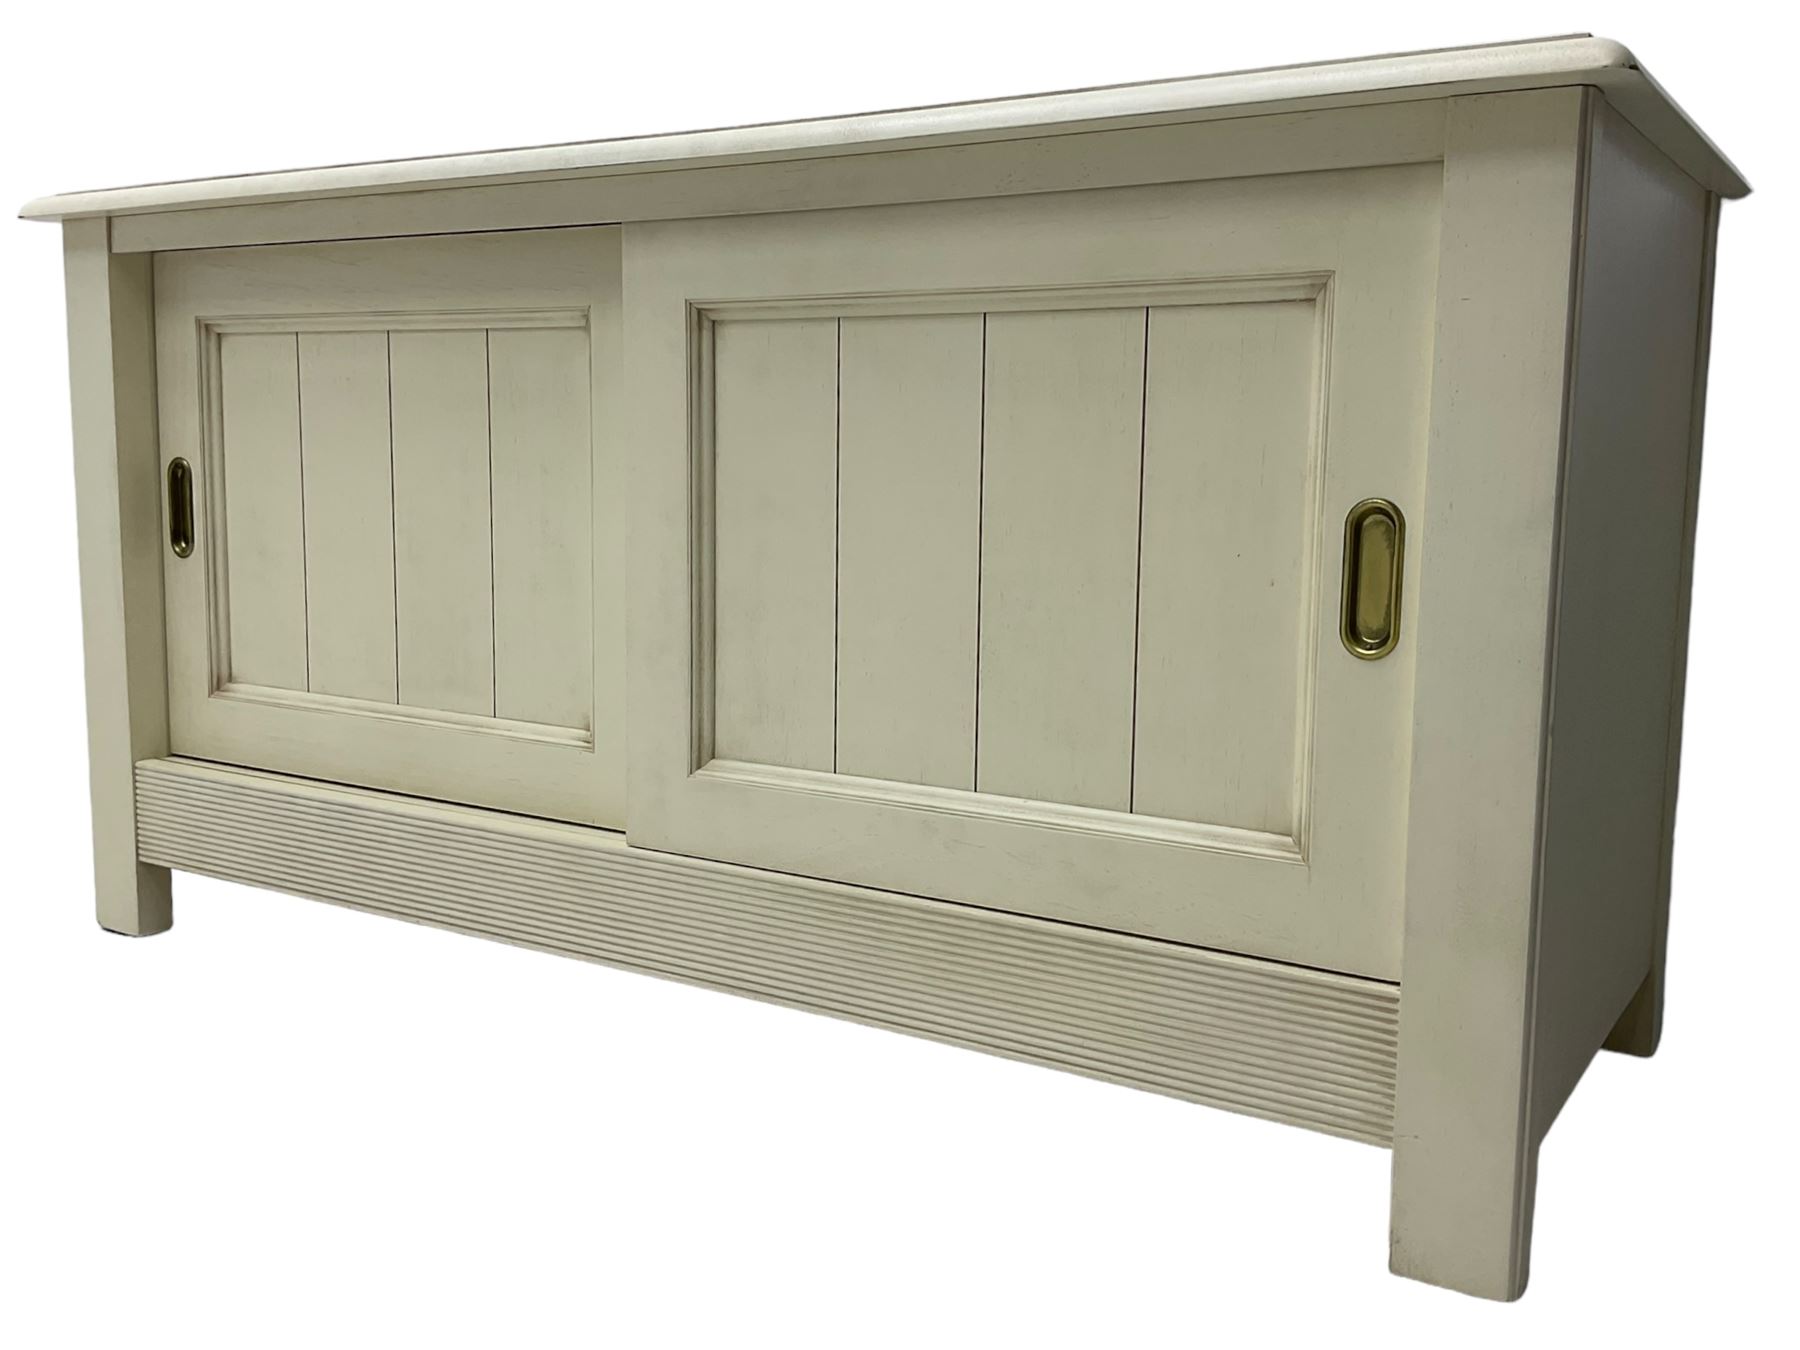 Cream finish low side cabinet - Image 5 of 6